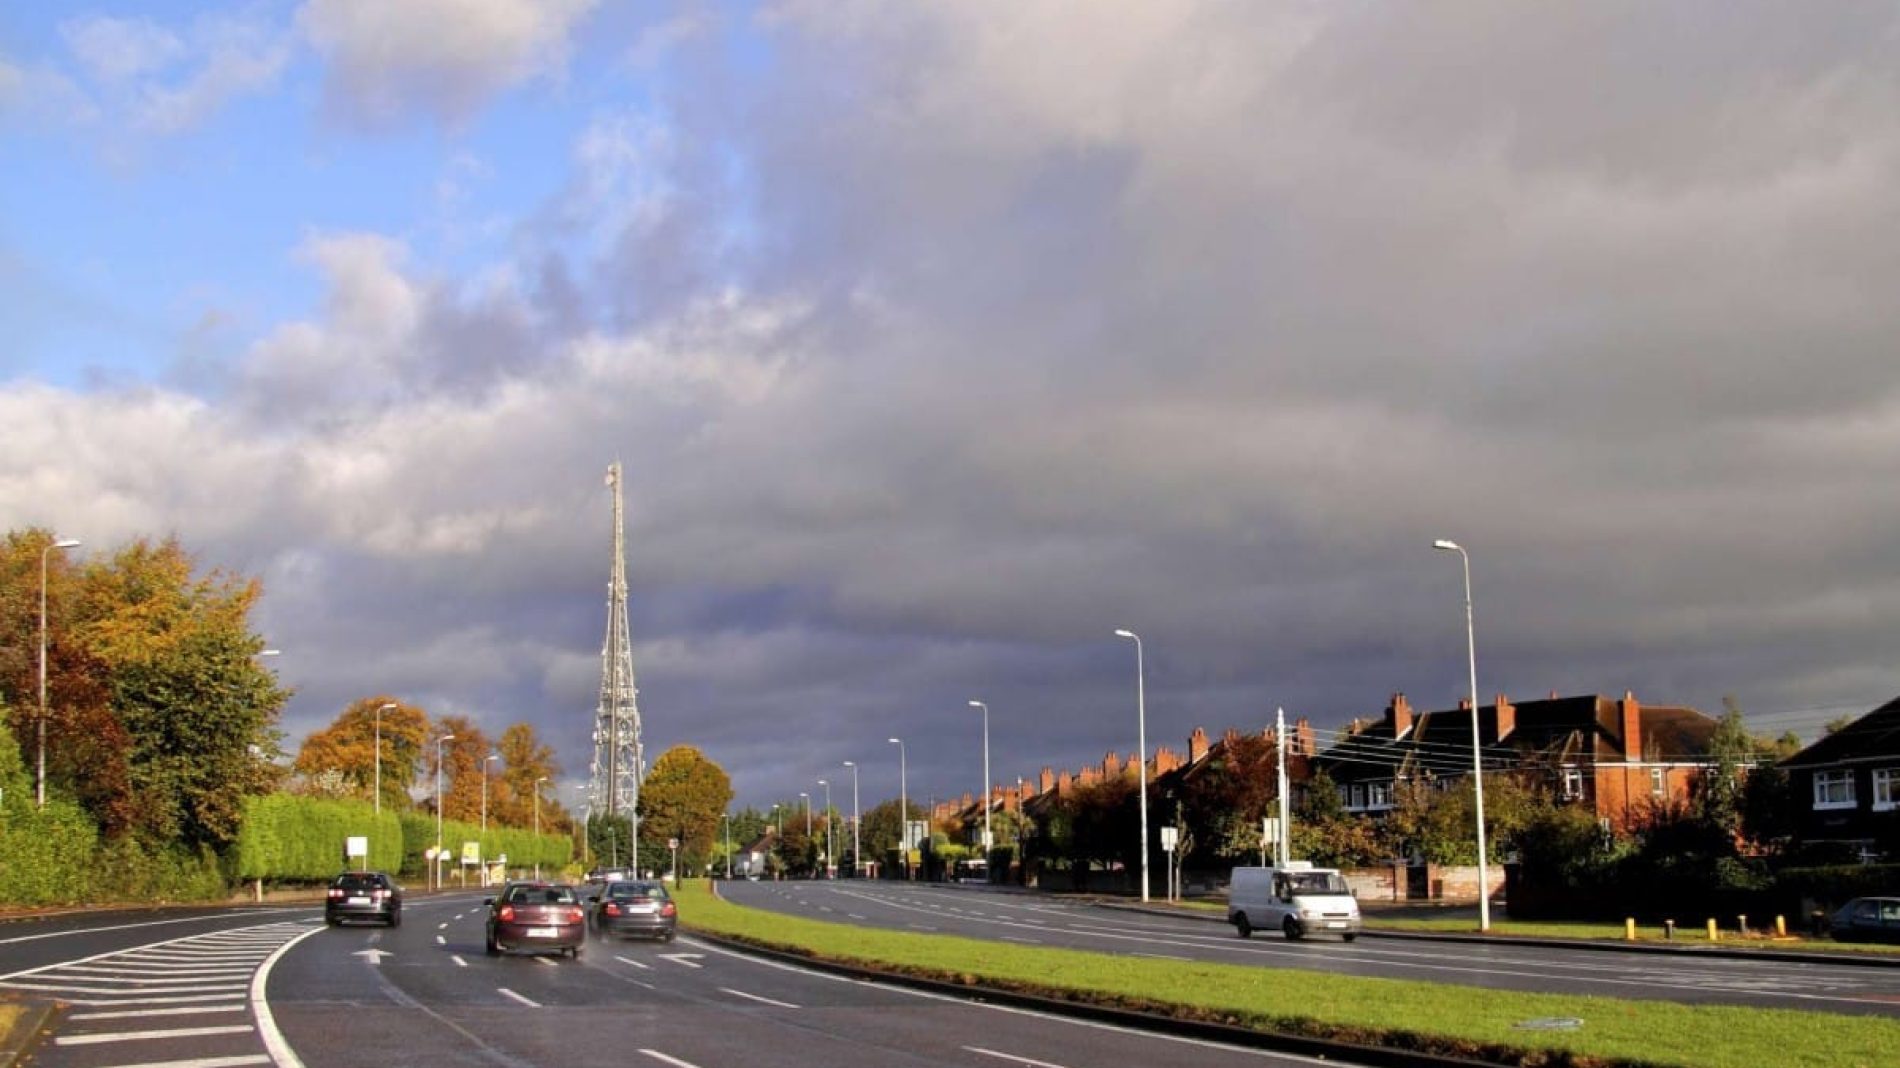 View of the RTE tower from the Stillorgan Road